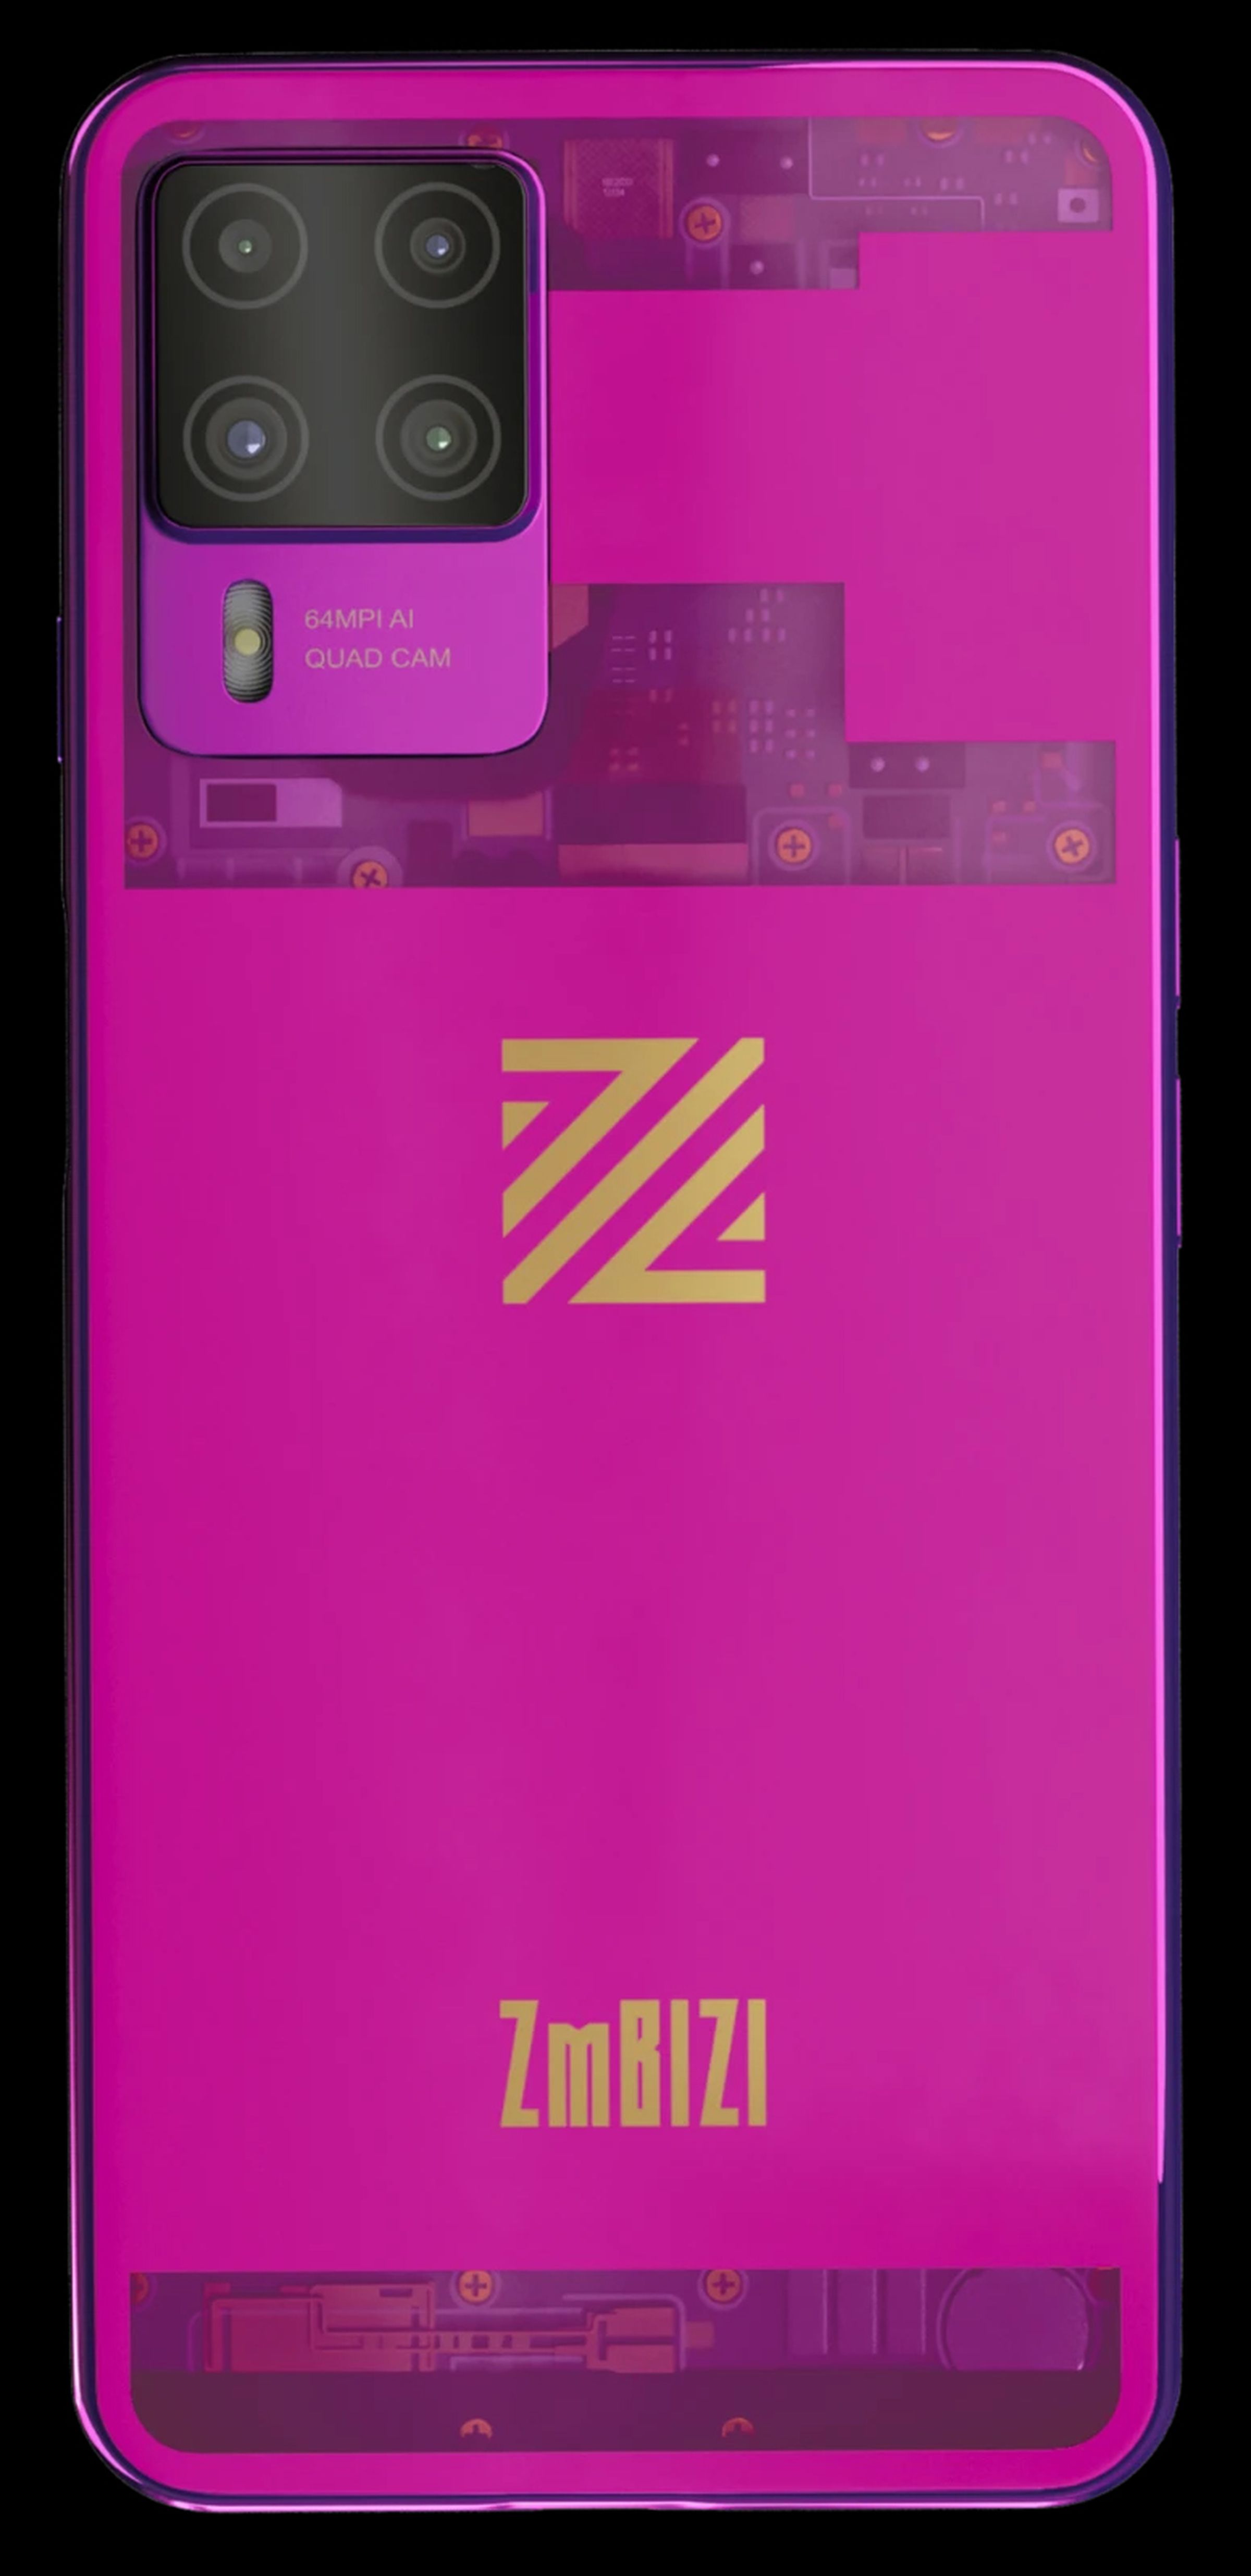 The ZmBIZI Z2 has quad cameras on the back, with a 64-megapixel main camera.